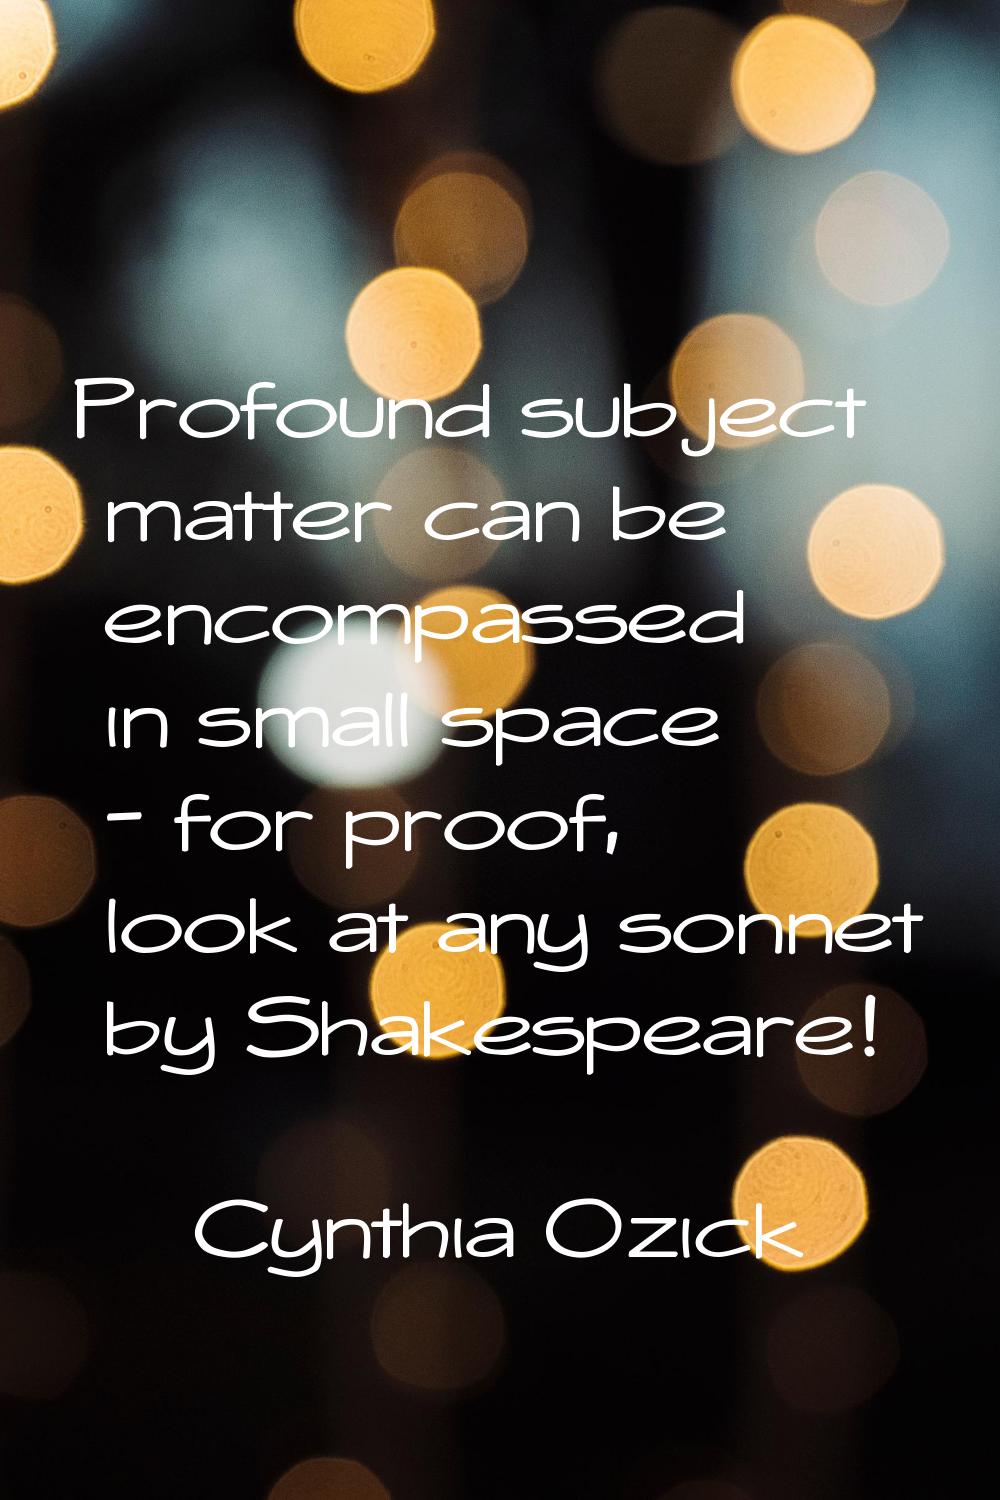 Profound subject matter can be encompassed in small space - for proof, look at any sonnet by Shakes